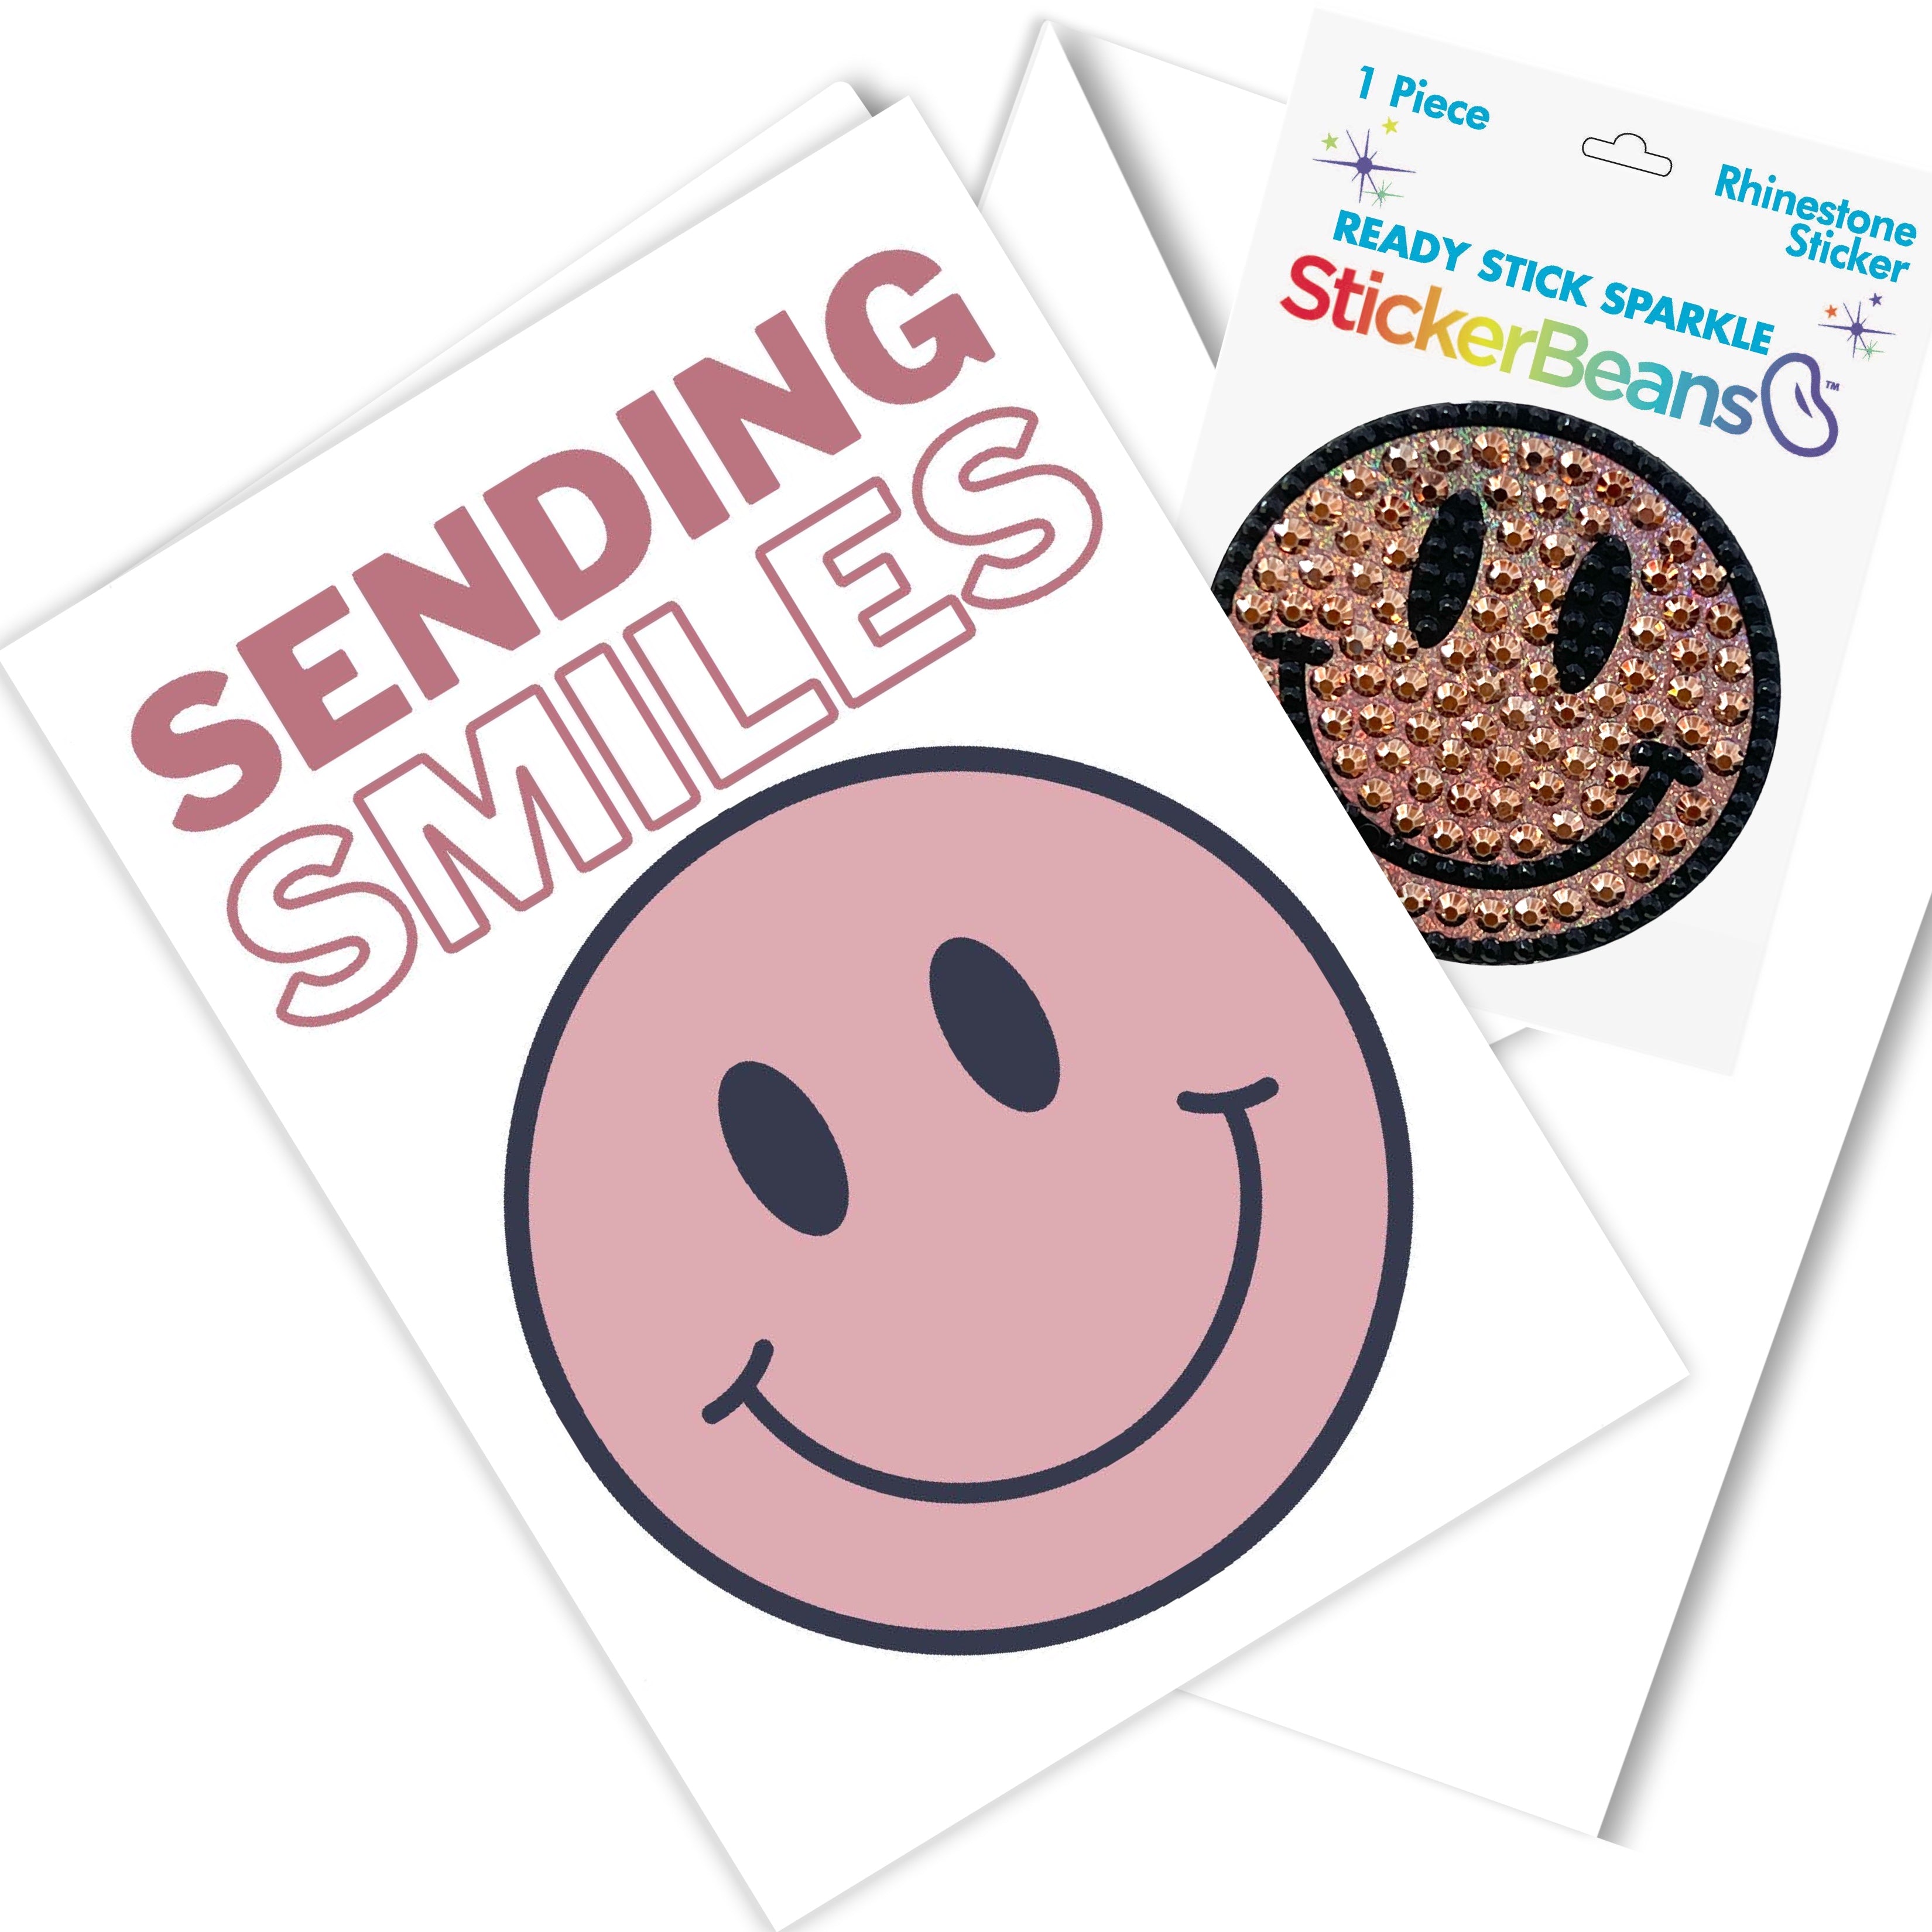 StickerBeans Greeting Card With Coordinating Sticker– Sending Smiles– 5" X 7"